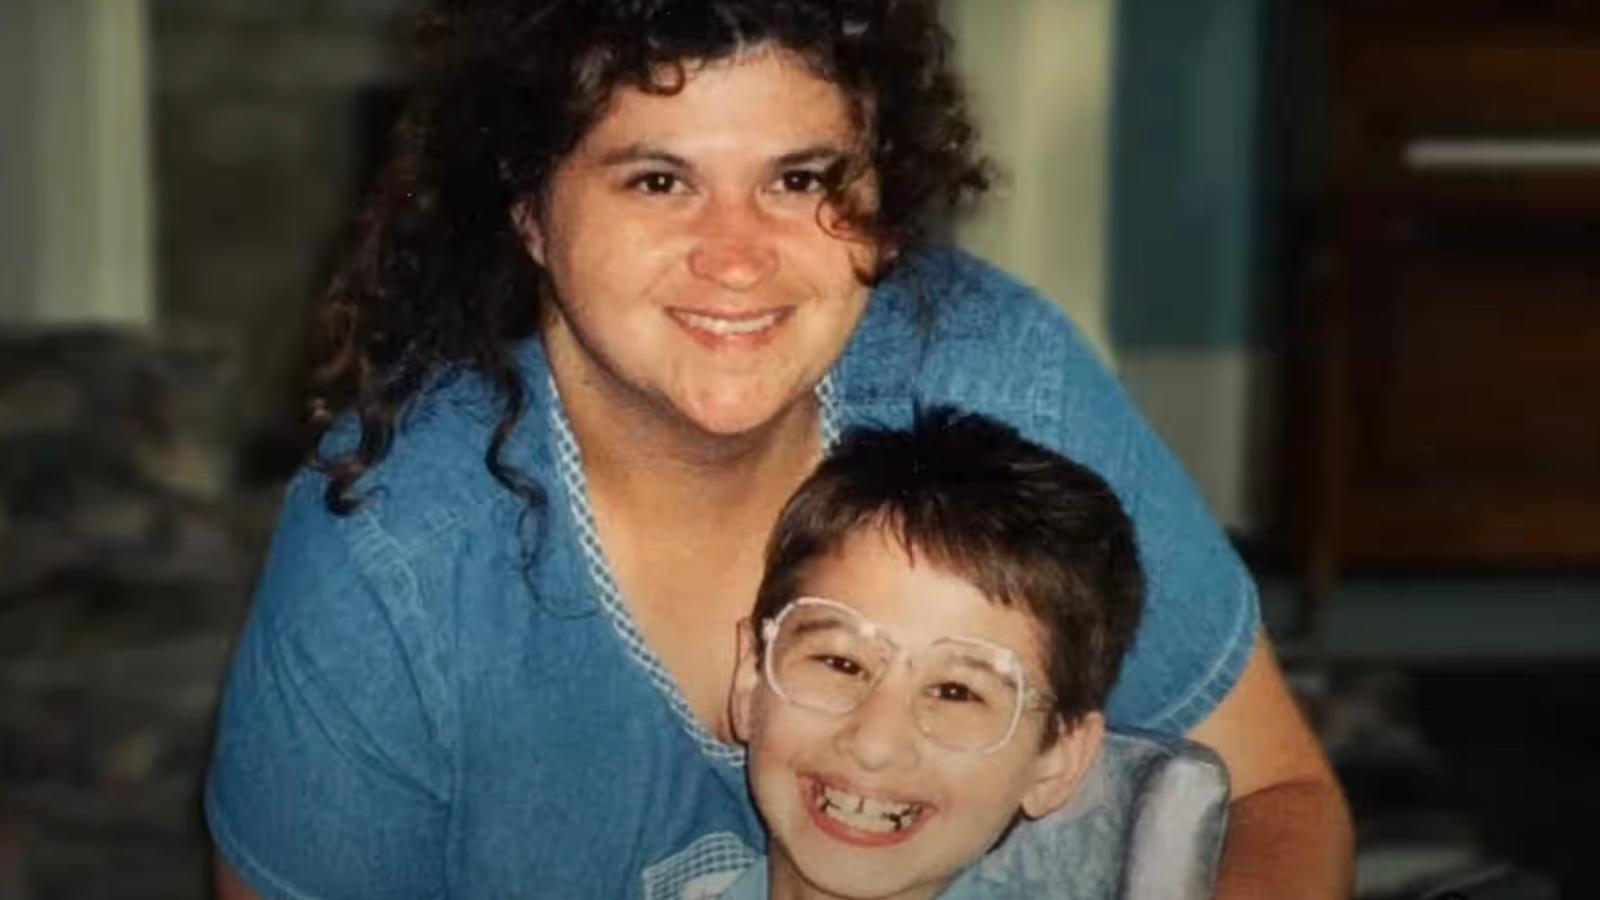 Photo of Gypsy Rose and Dee Blanchard from The Prison Confessions of Gypsy Rose Blanchard